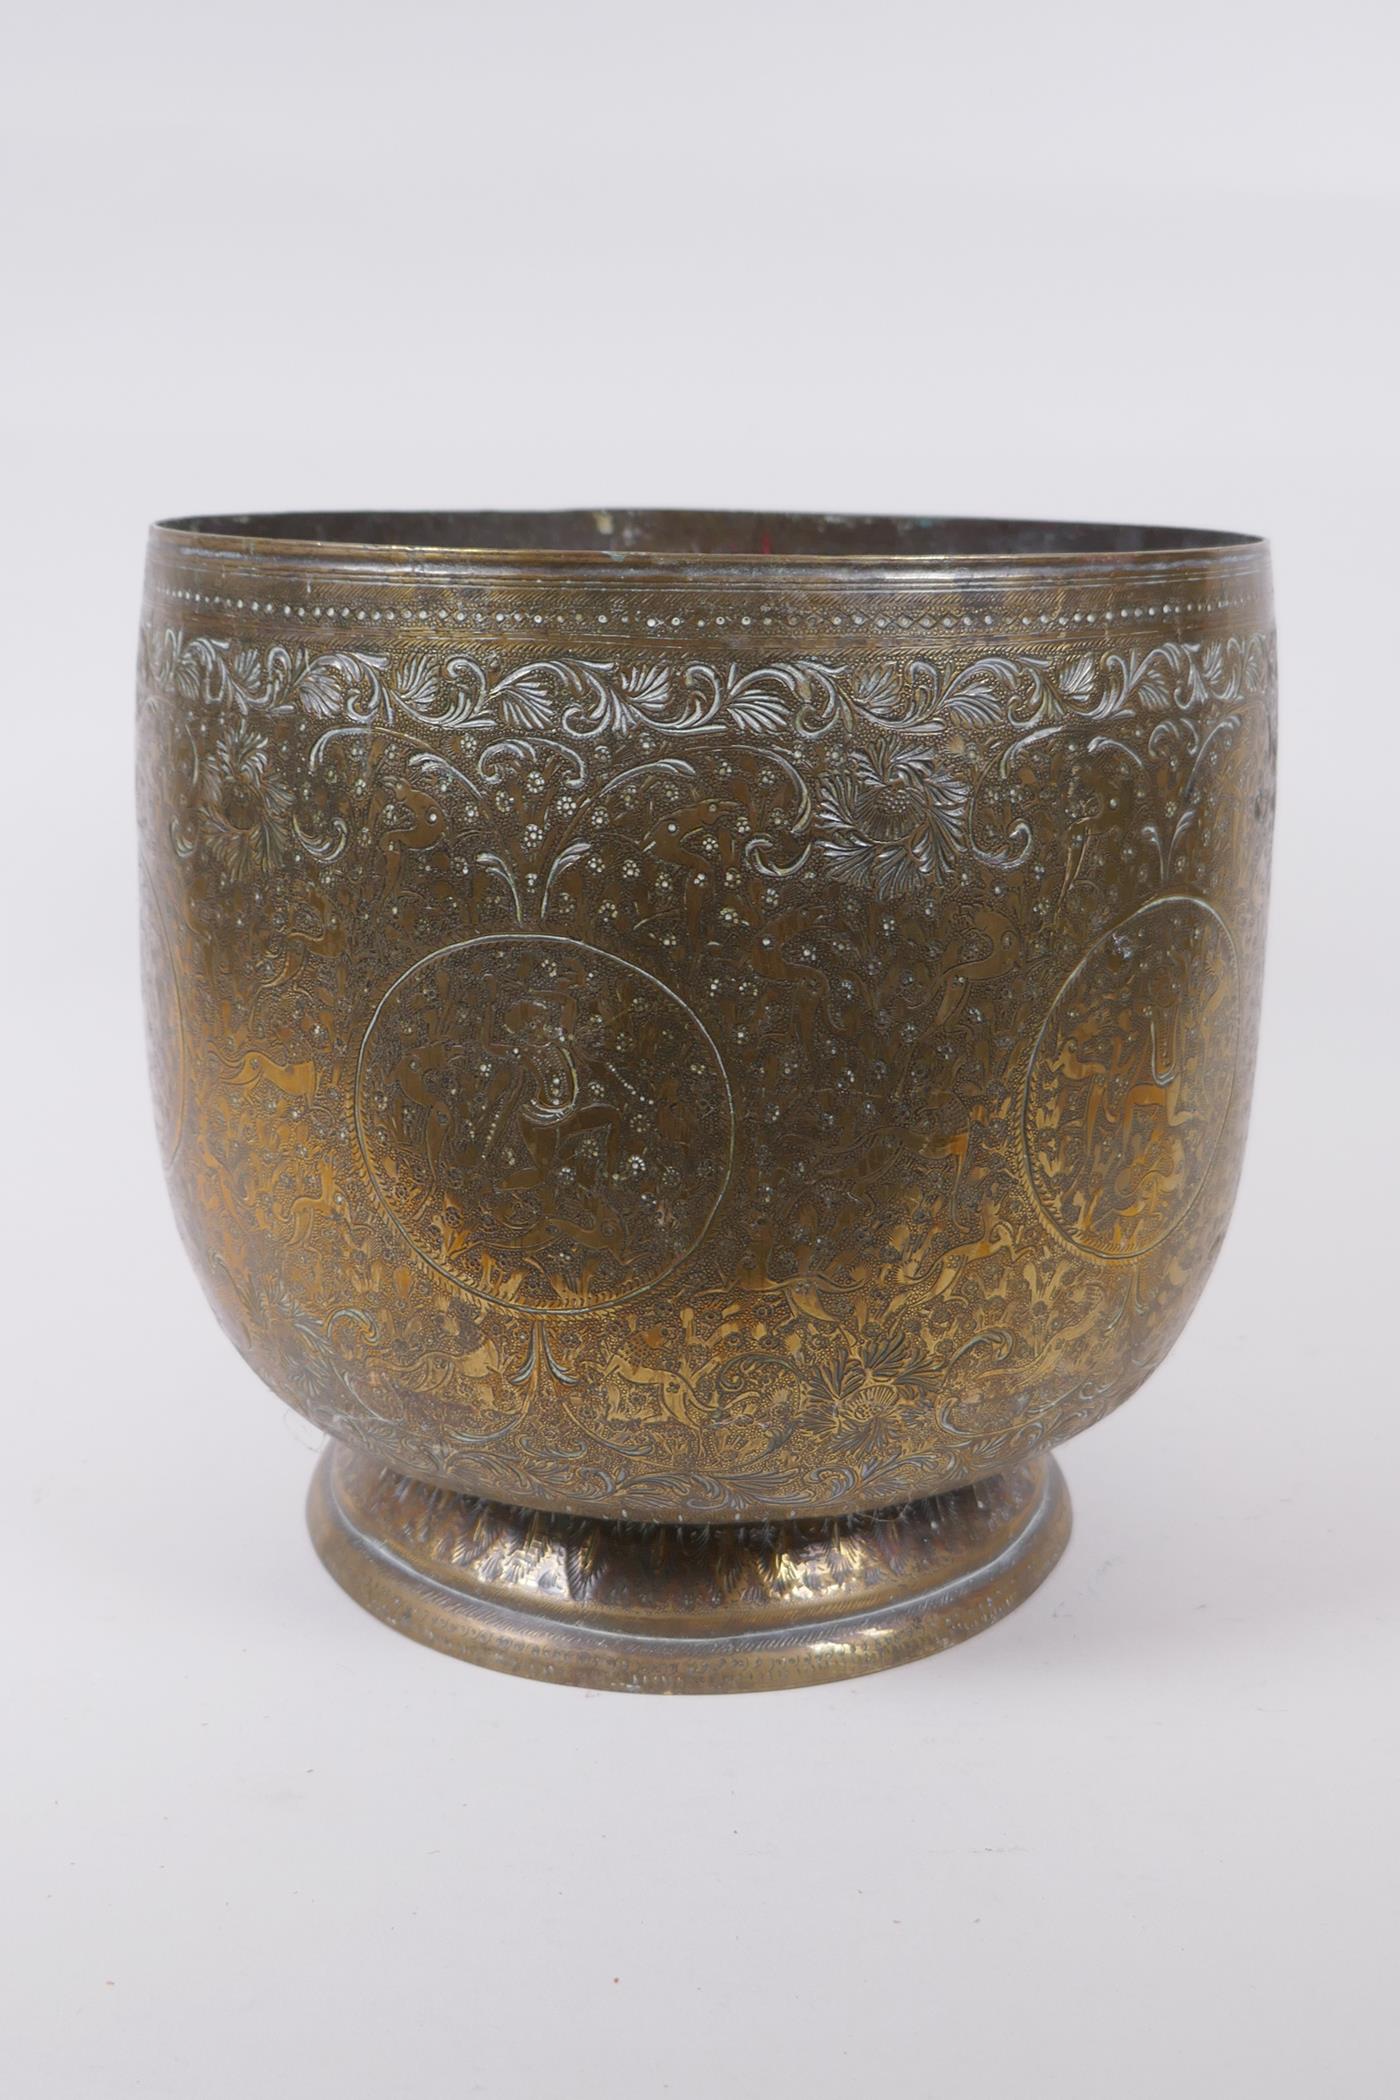 An antique Indo Persian brass planter with chased and hammered decoration of dancing figures and - Image 4 of 5